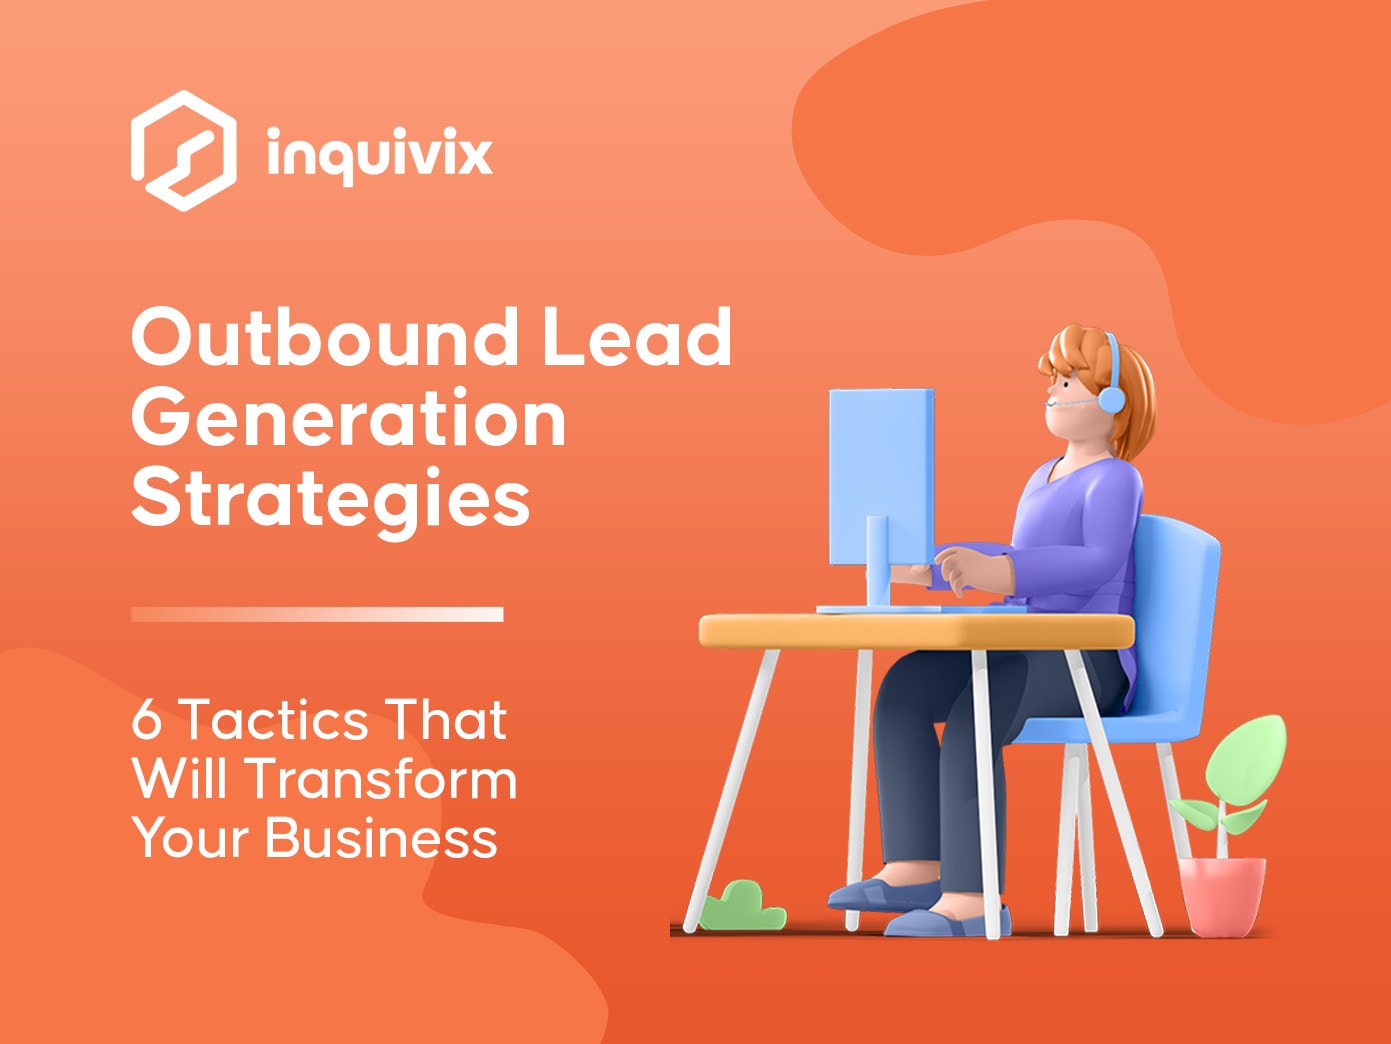 Outbound Lead Generation Strategies 6 Tactics That Will Transform Your Business | INQUIVIX